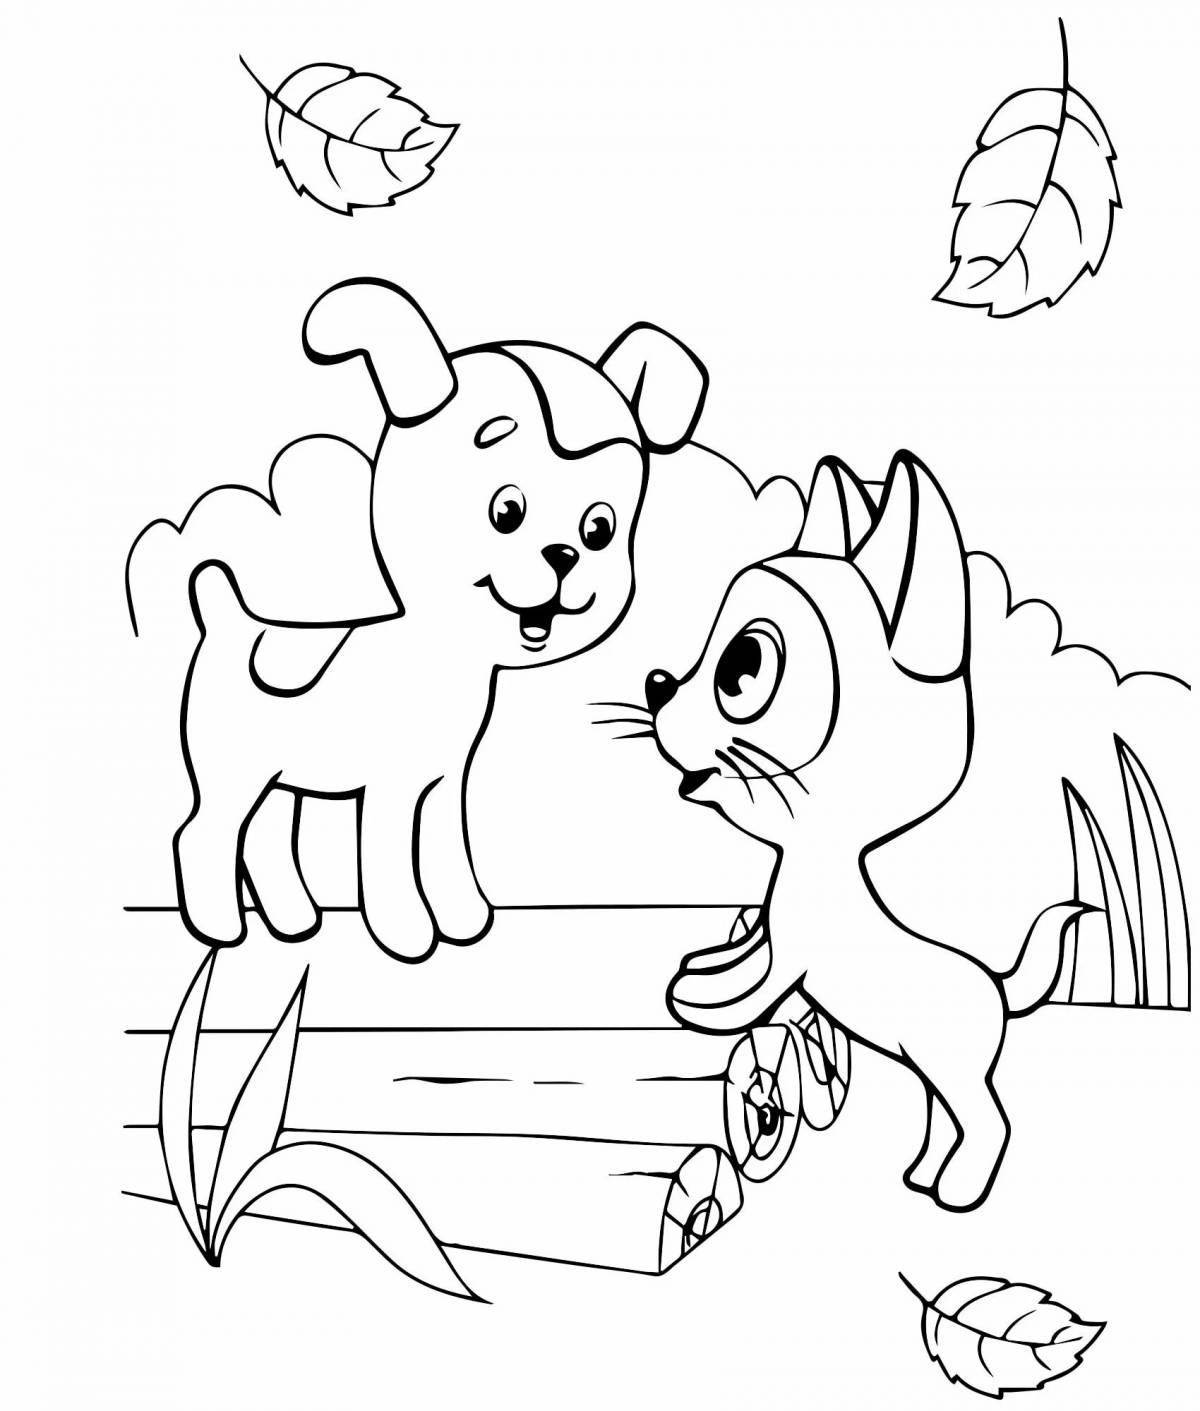 Kitten and puppy maintenance coloring page